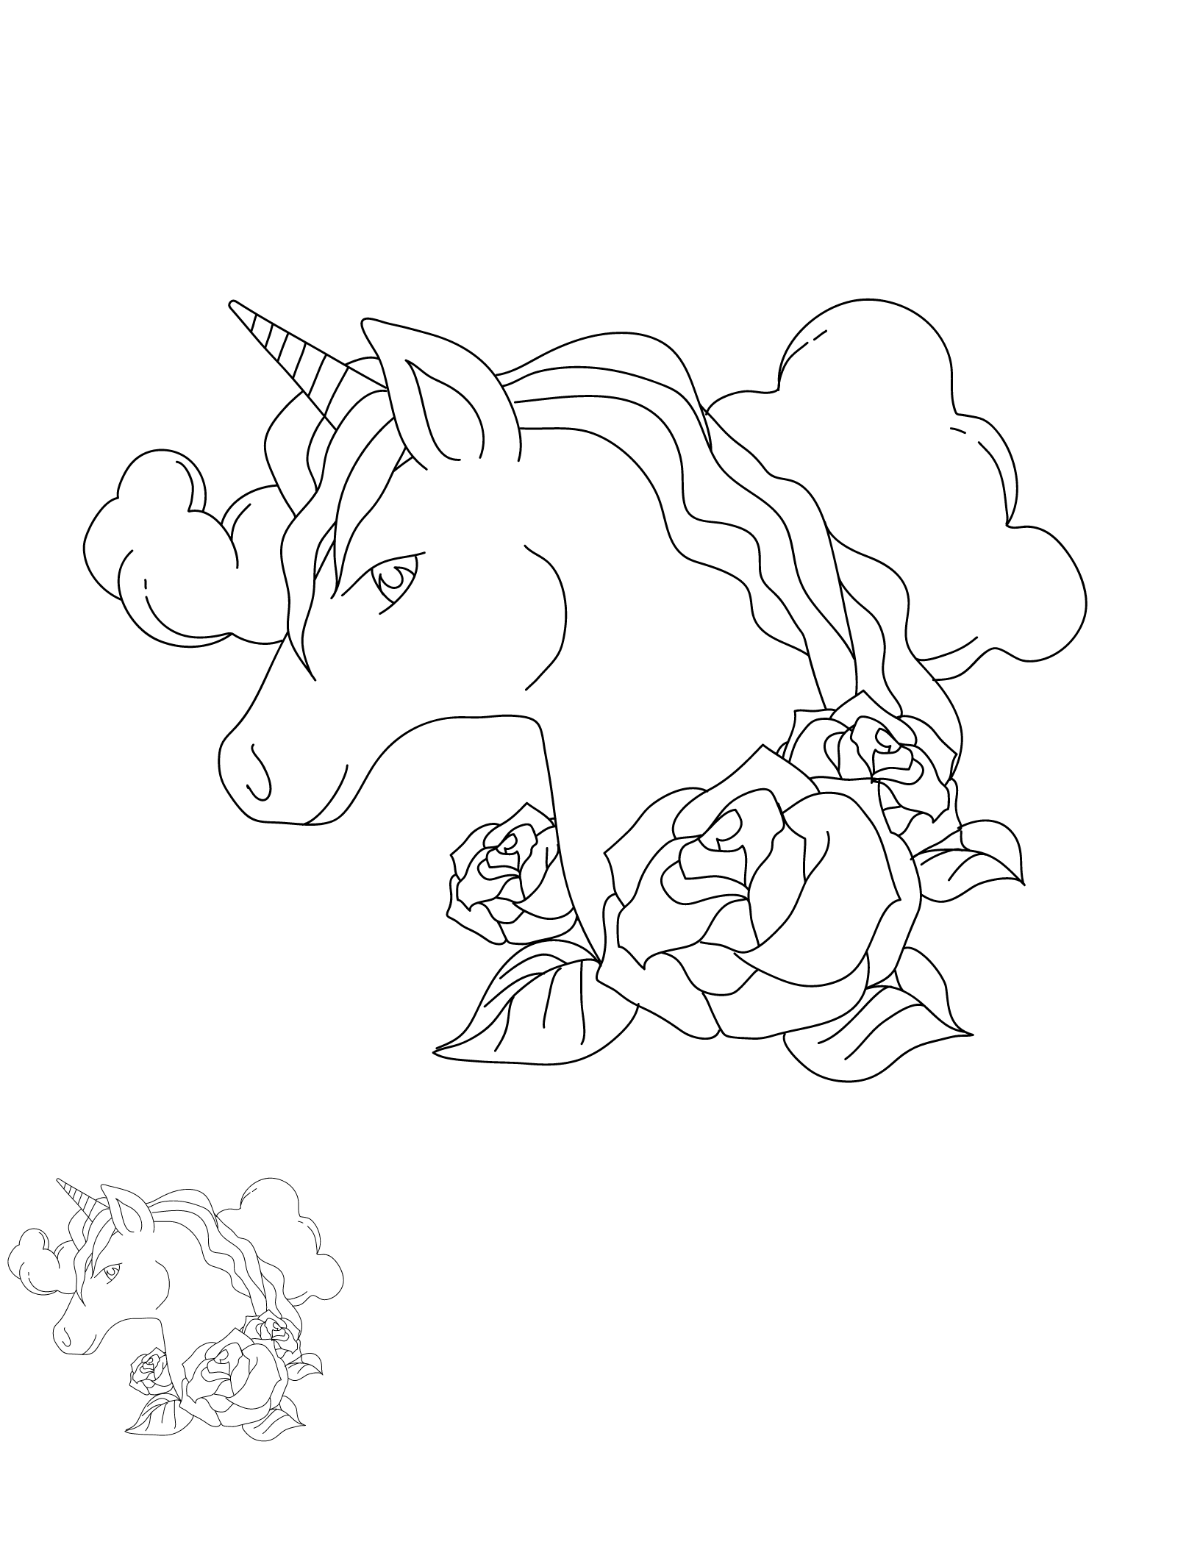 Flower Unicorn Coloring Page